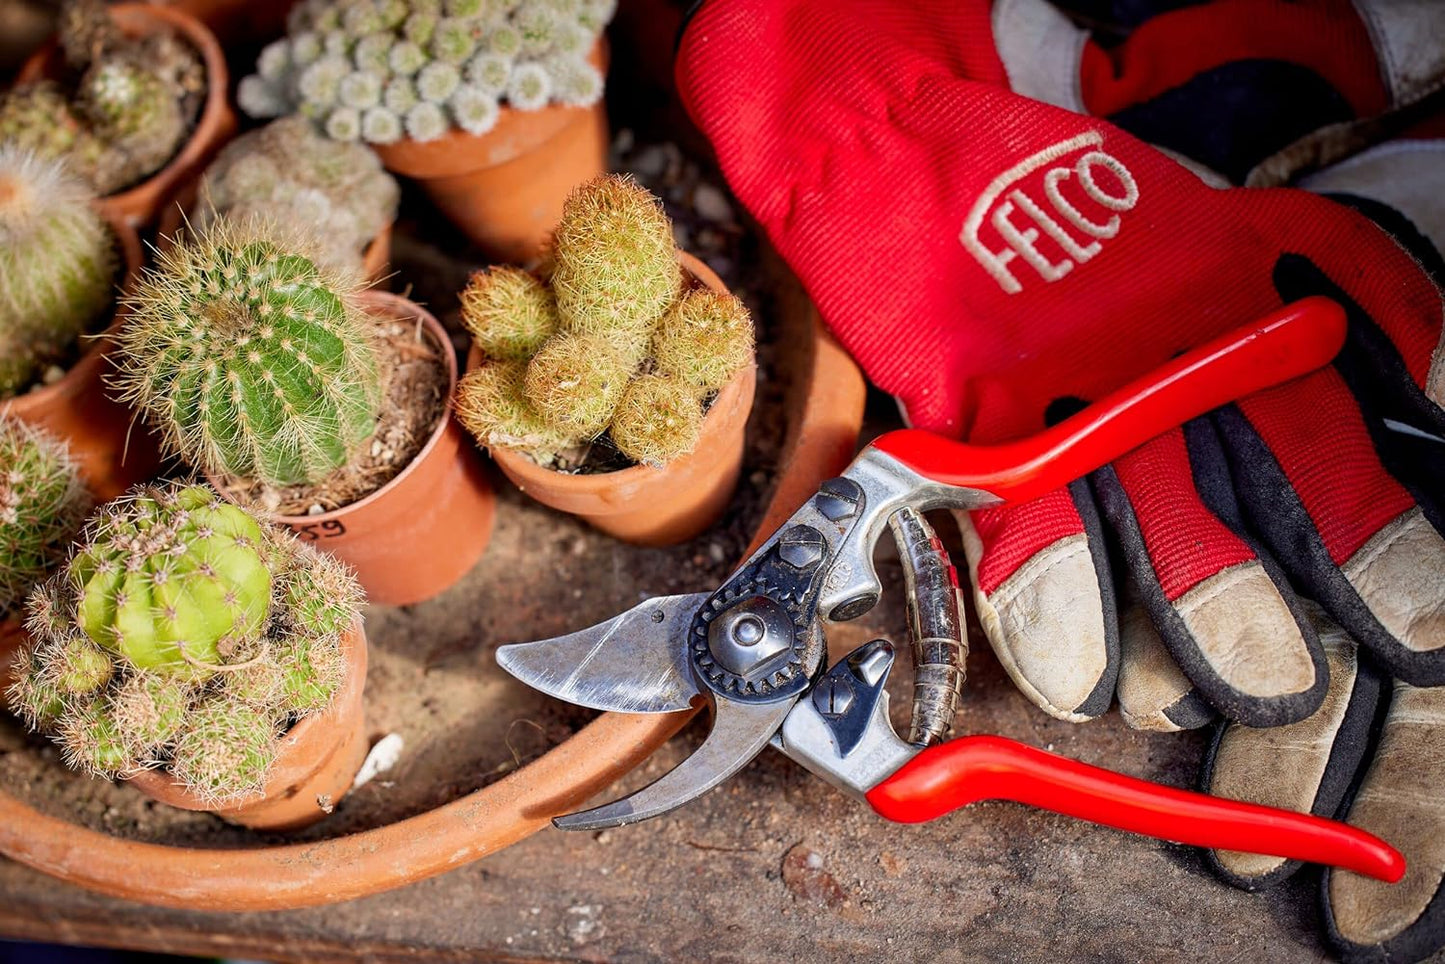 FELCO Pruning Shears (F 14) - High Performance Swiss Made One-Hand Garden Pruner with Steel Blade,Red, Silver